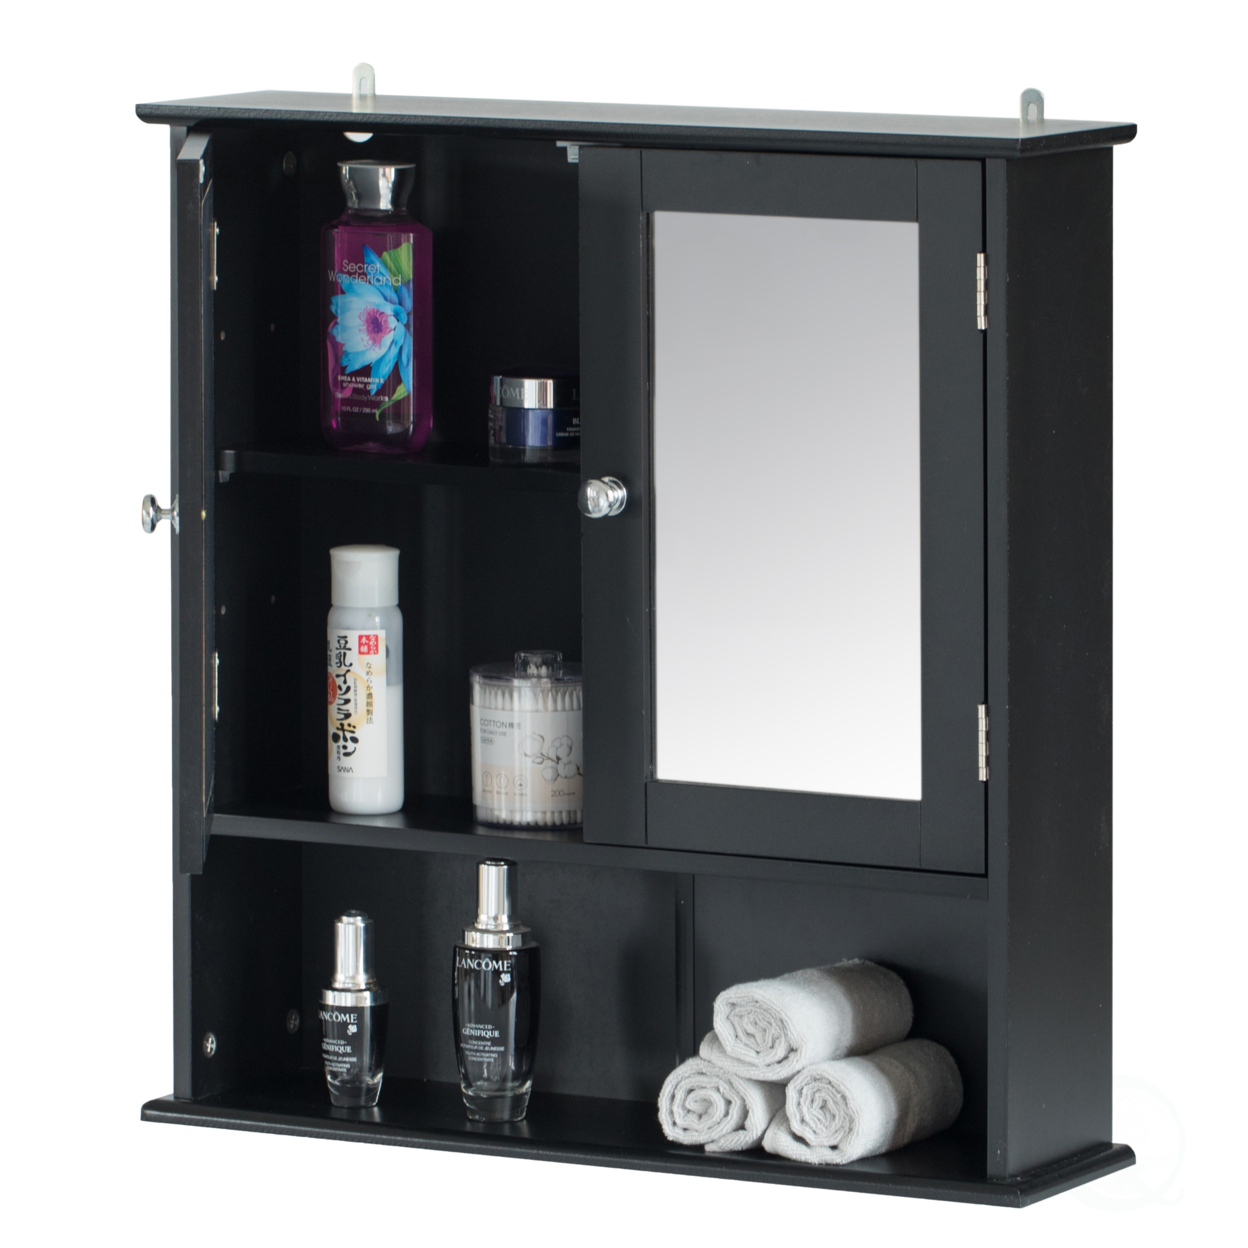 Mirror Wall Mounted Cabinet For The Bathroom And Vanity With Adjustable Shelves - Black